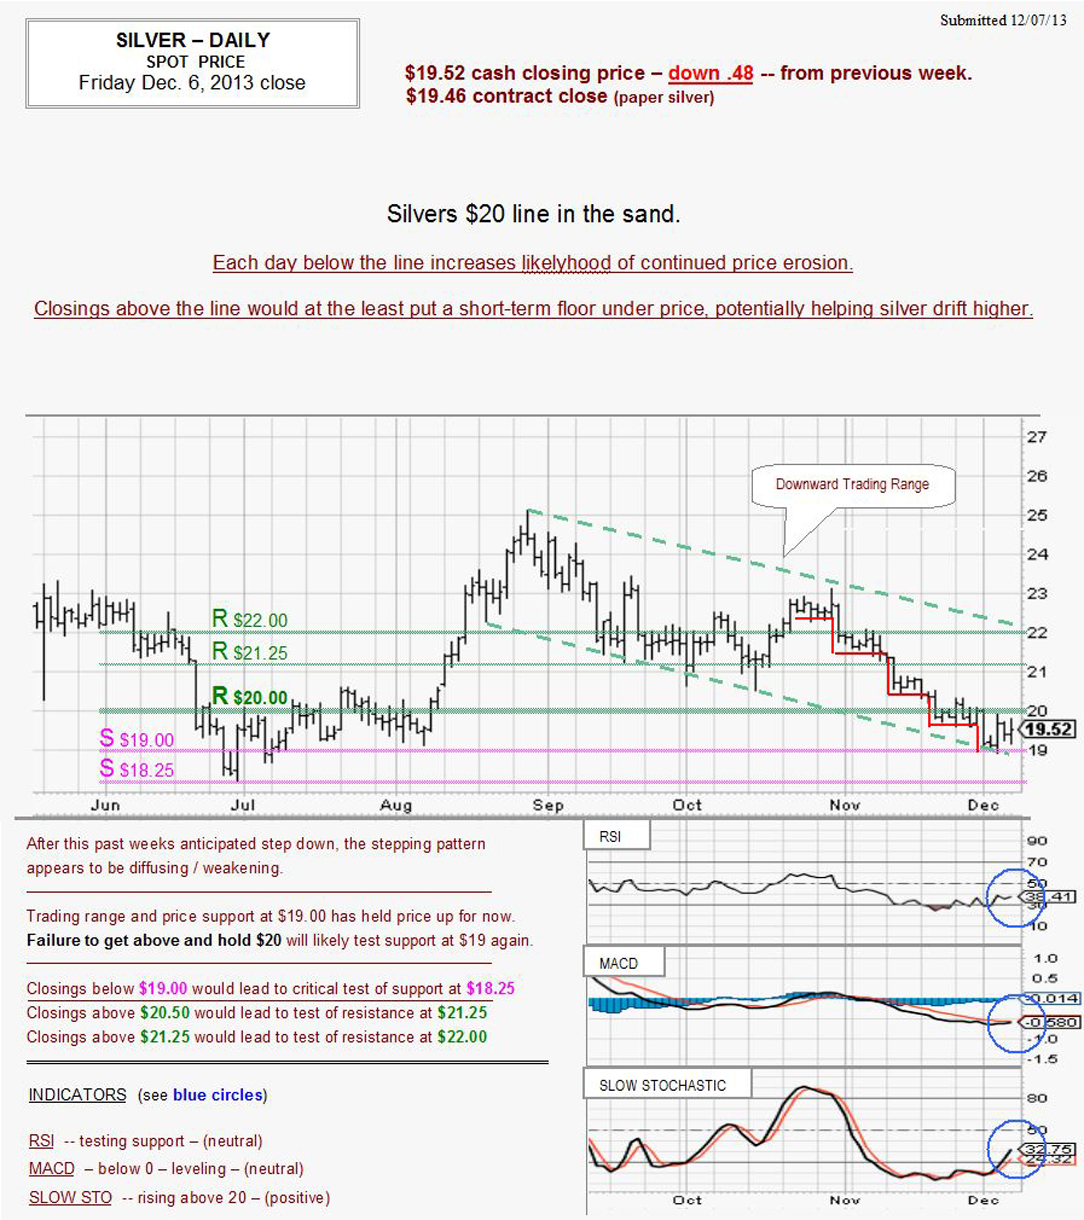 Dec 6, 2013 chart & commentary